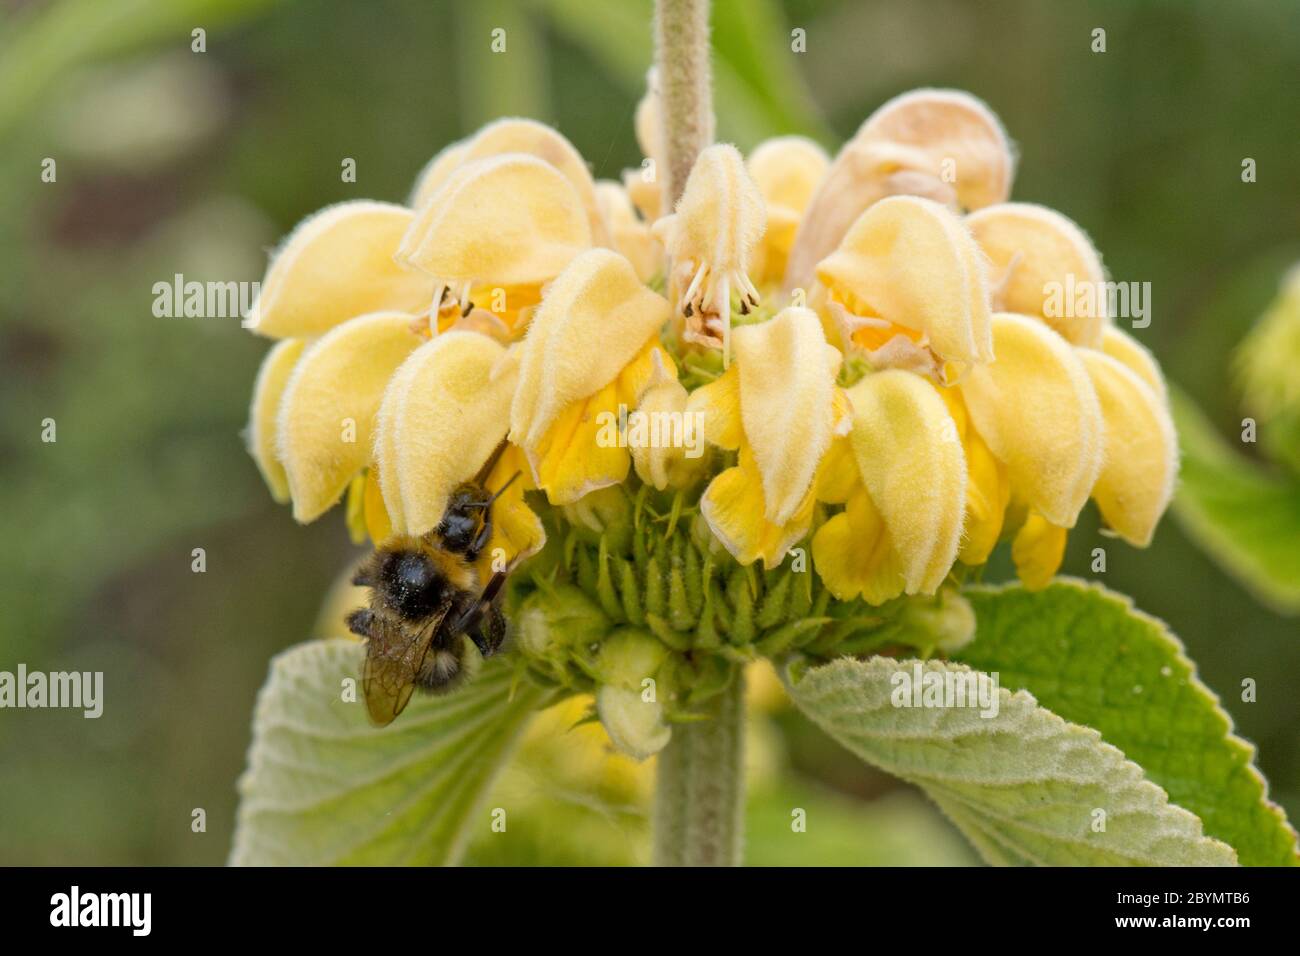 Turkish sage (Phlomis russeliana) with a whorl of yellow hooded flowers being visited by a bumblebee, Berkshire, June Stock Photo